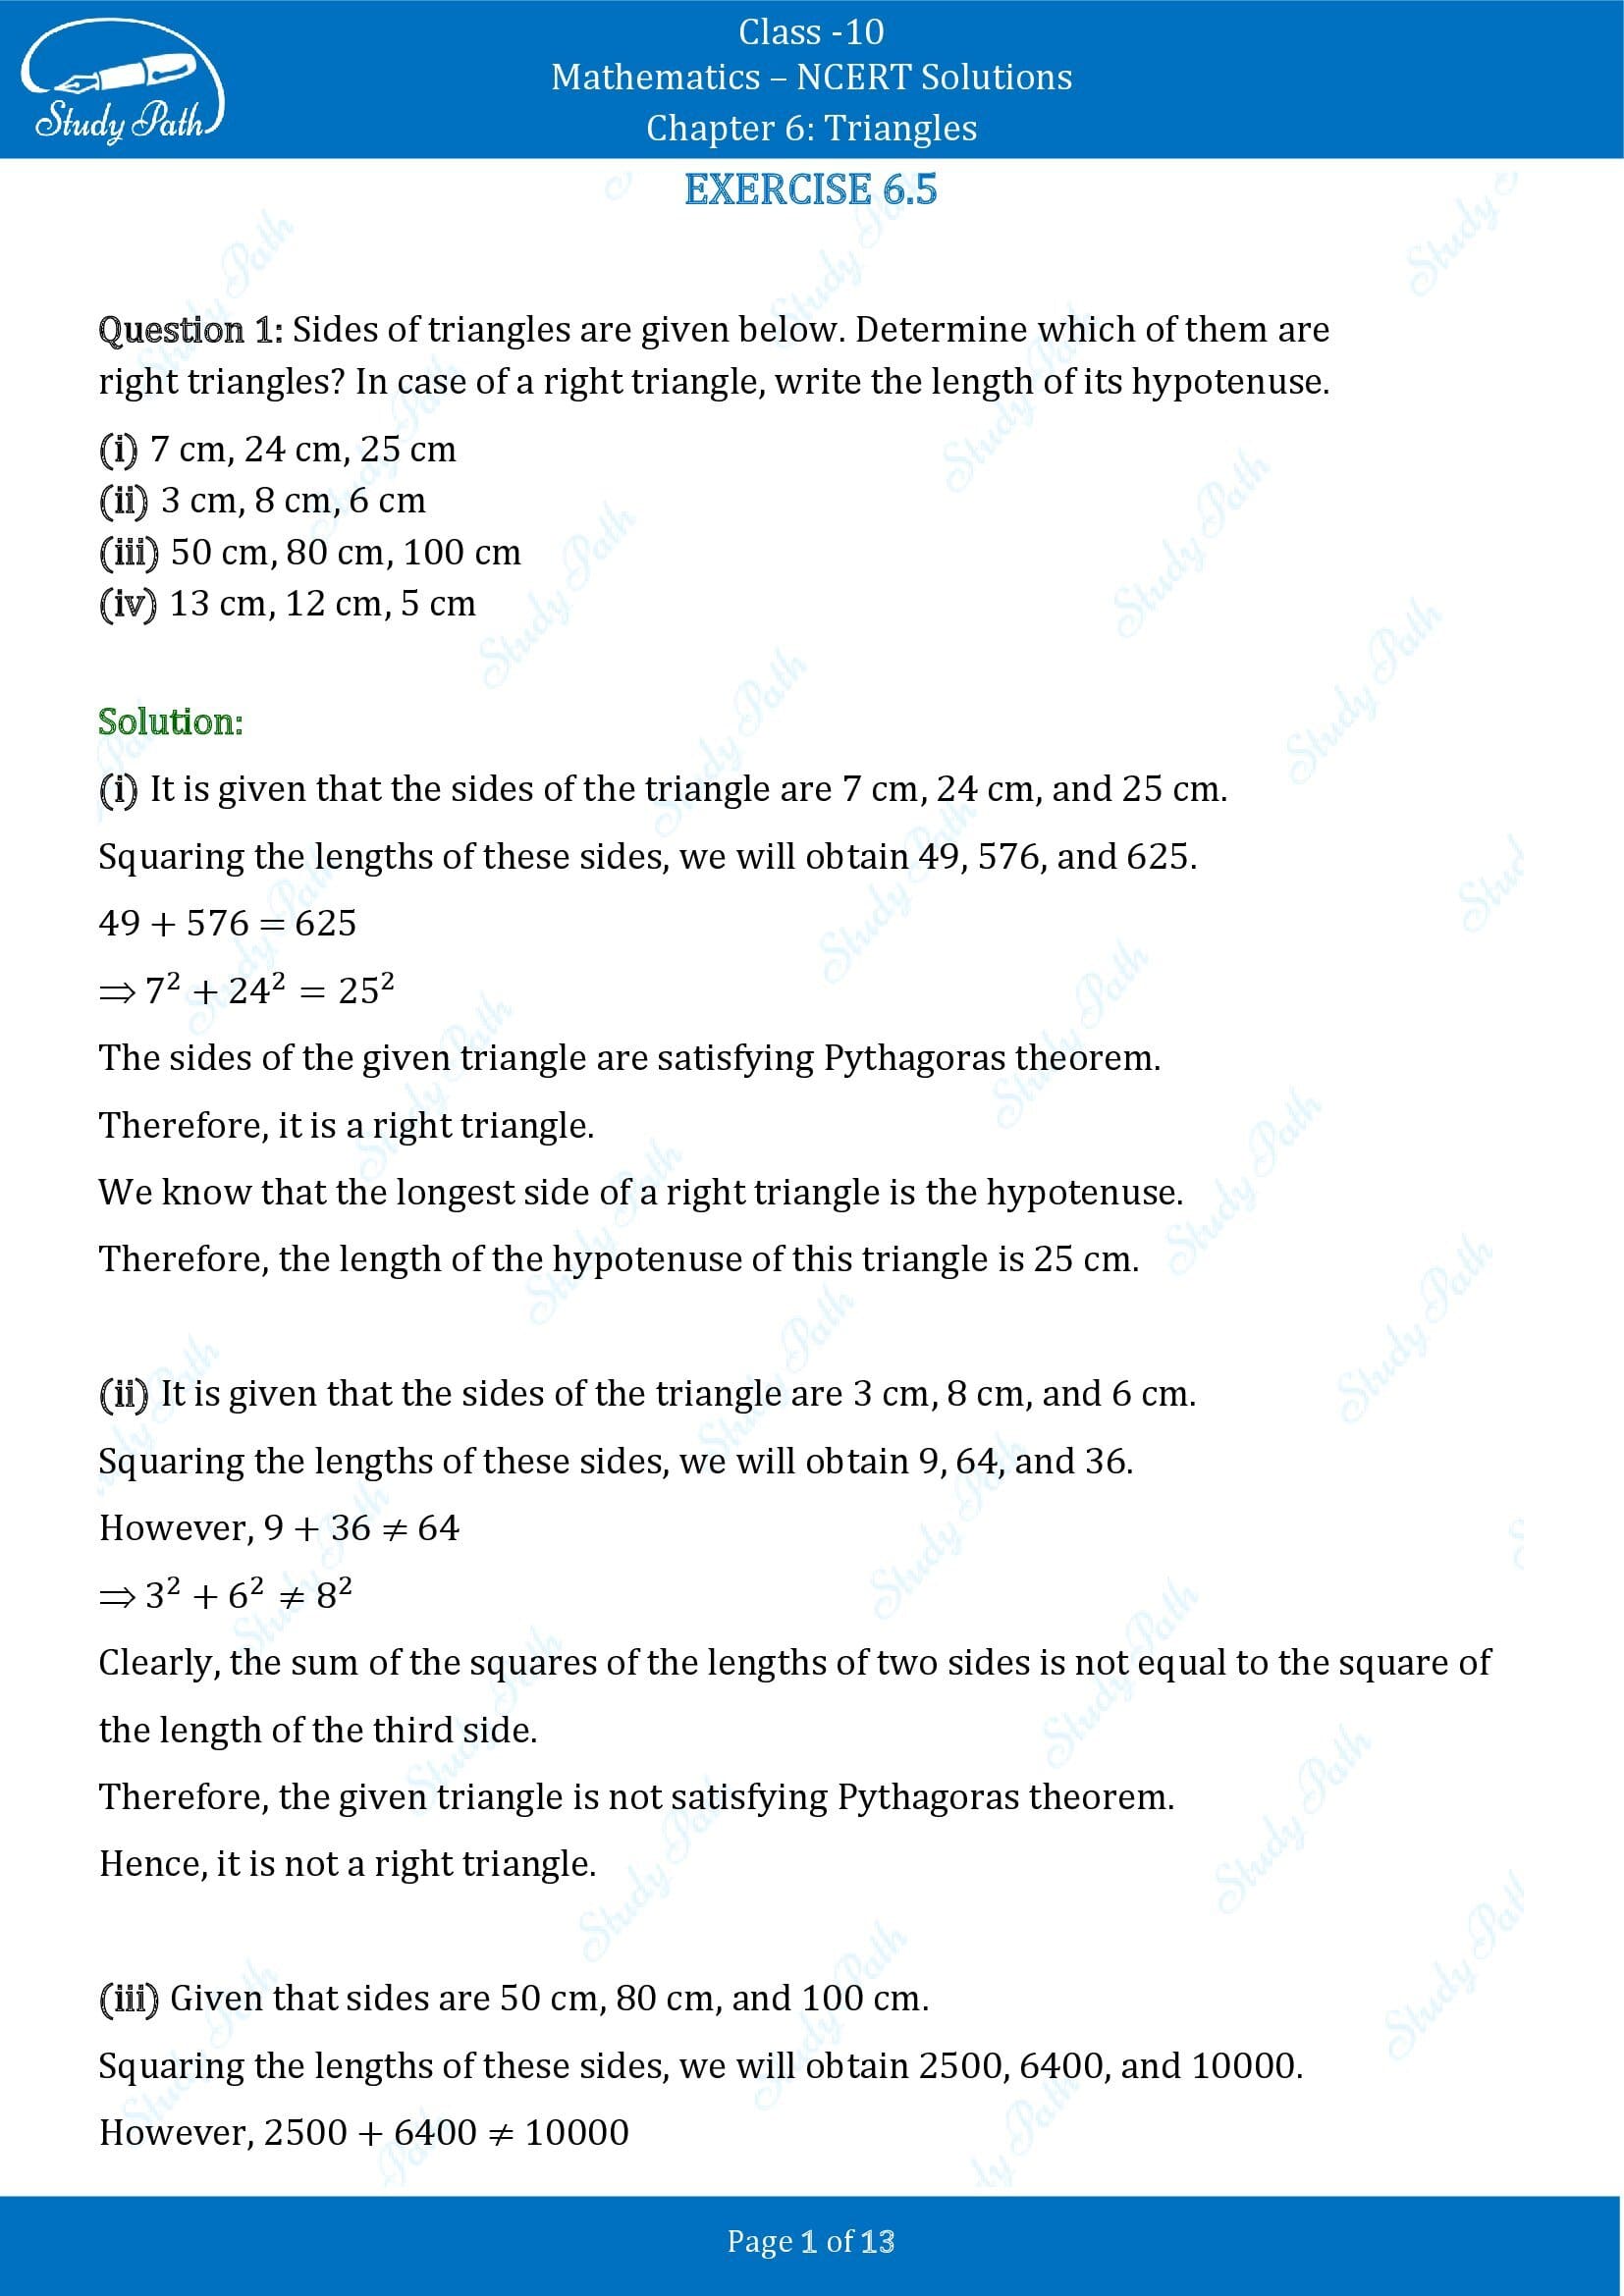 NCERT Solutions for Class 10 Maths Chapter 6 Triangles Exercise 6.5 00001